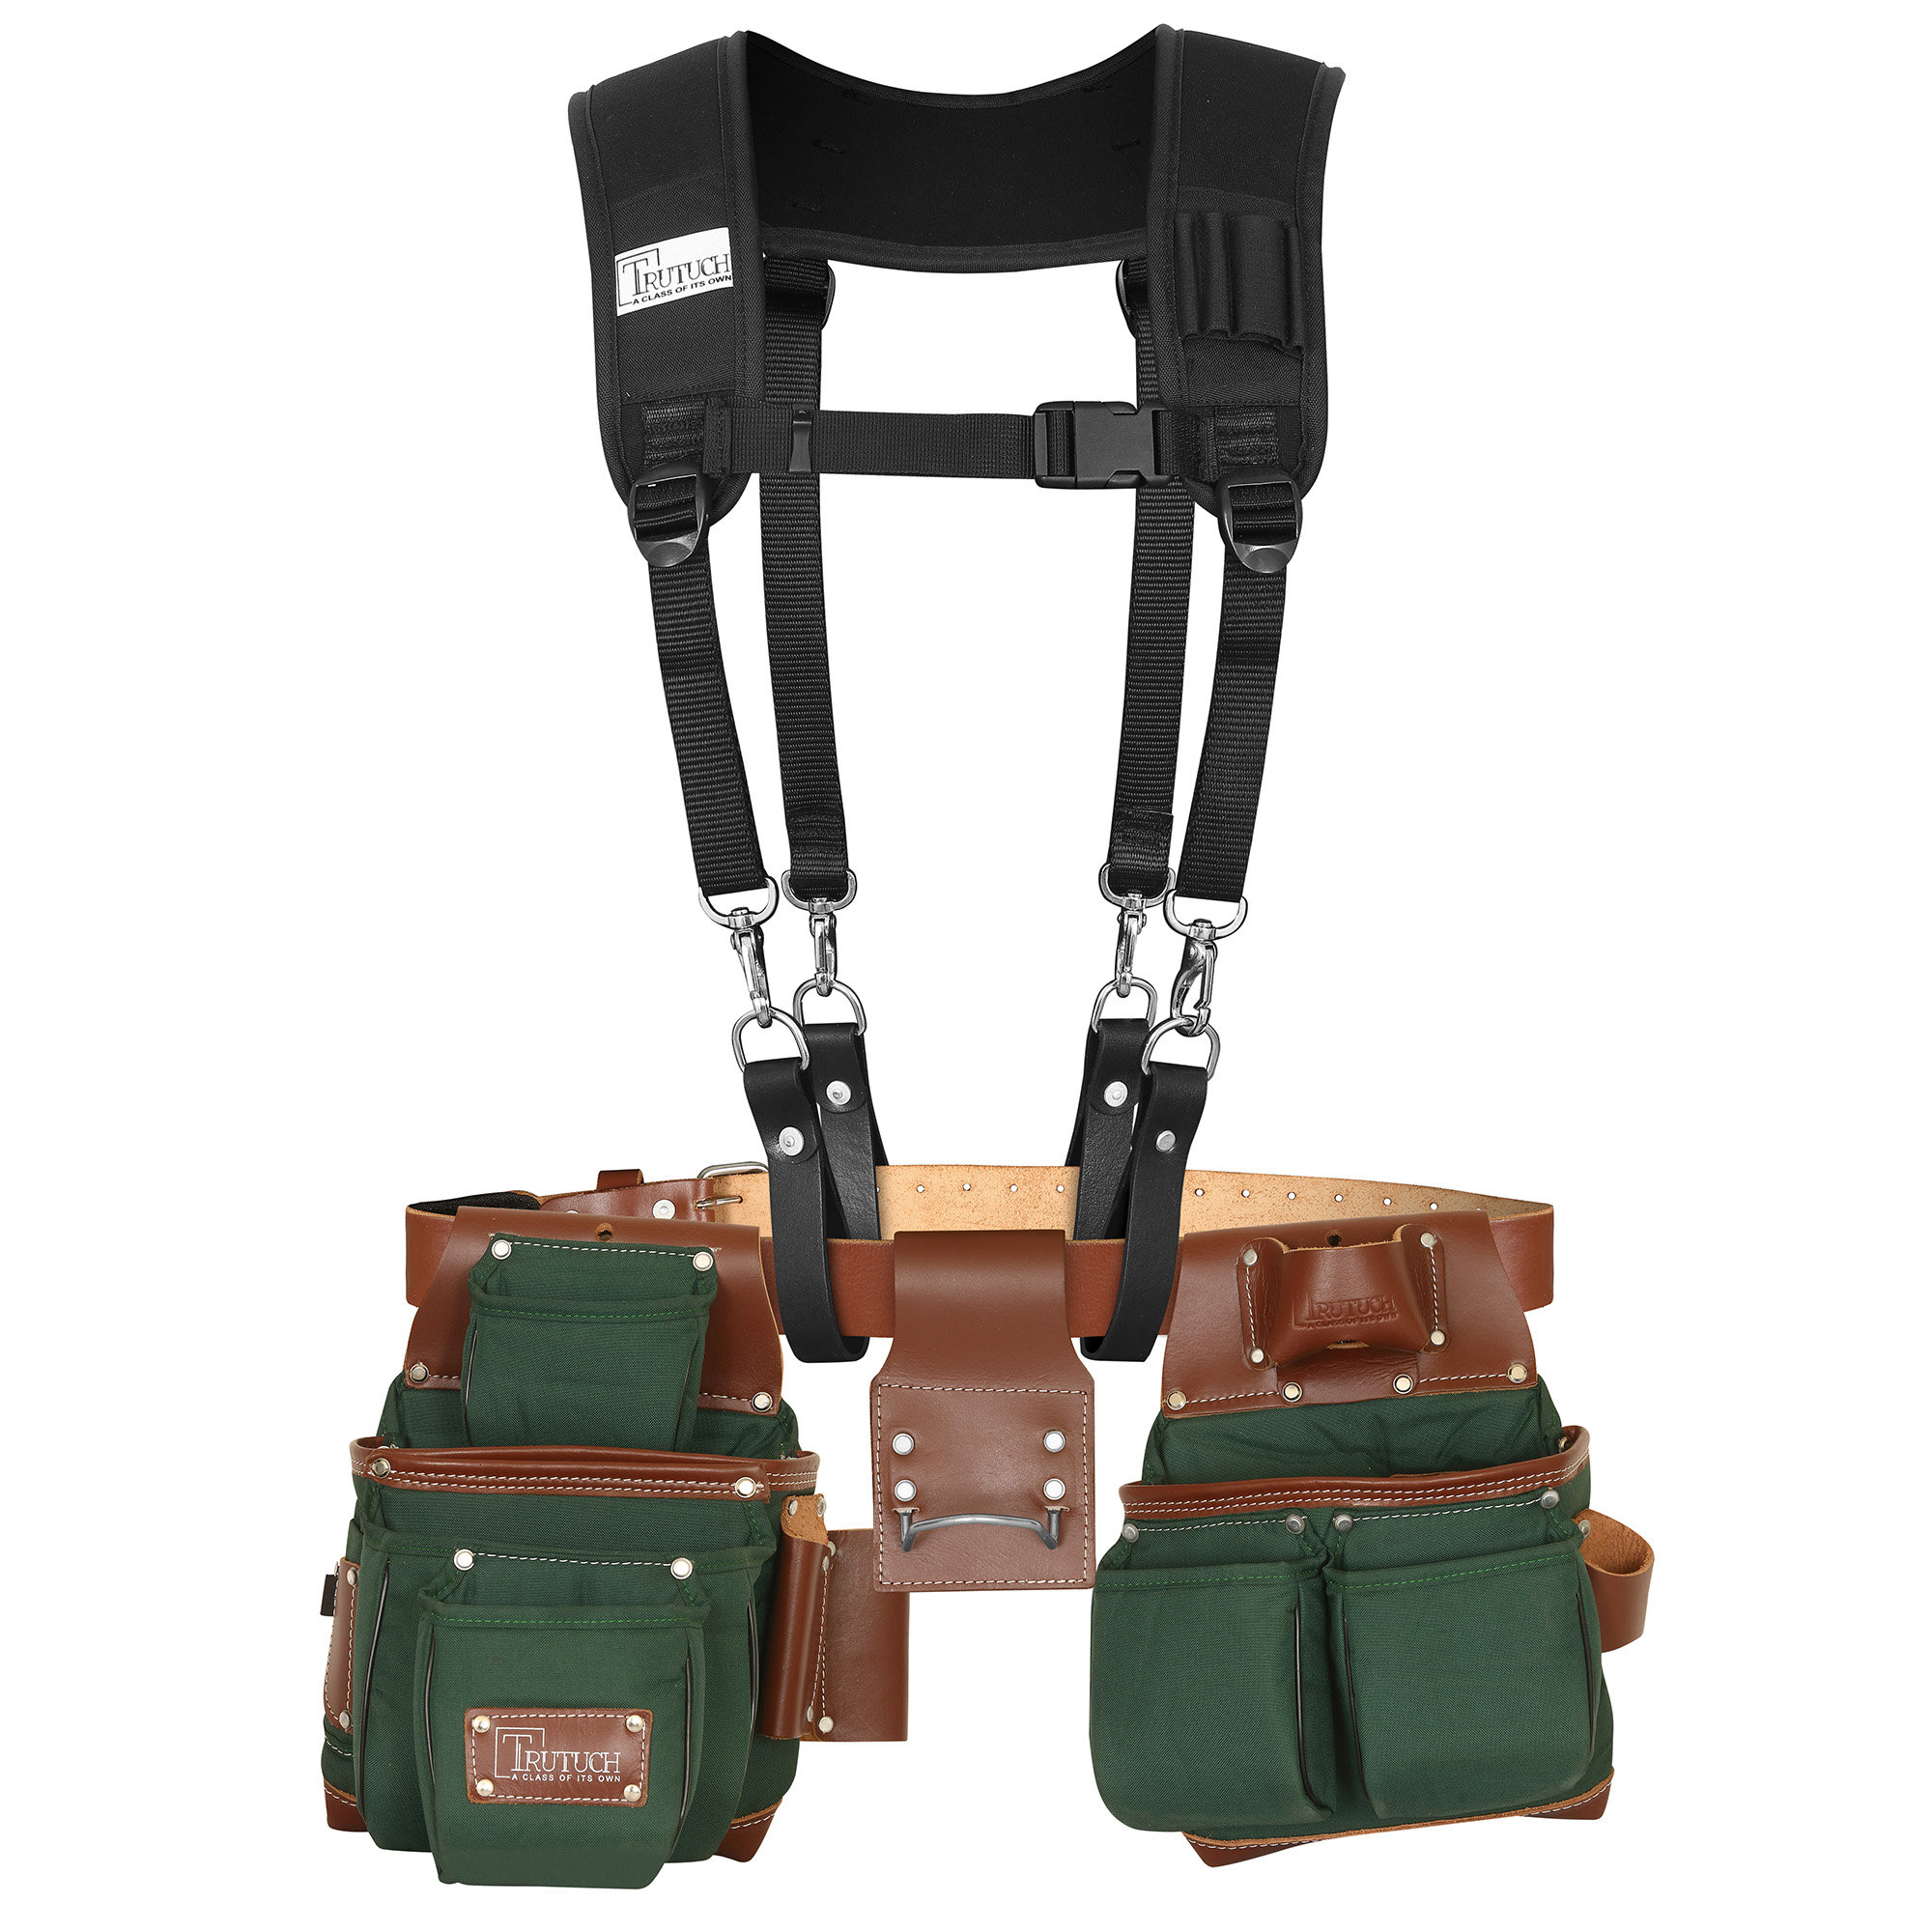 Occidental Leather 5080DBLH M Pro Framer Tool Belt Set with Double Outer Bags, Left Hand, Medium - 2